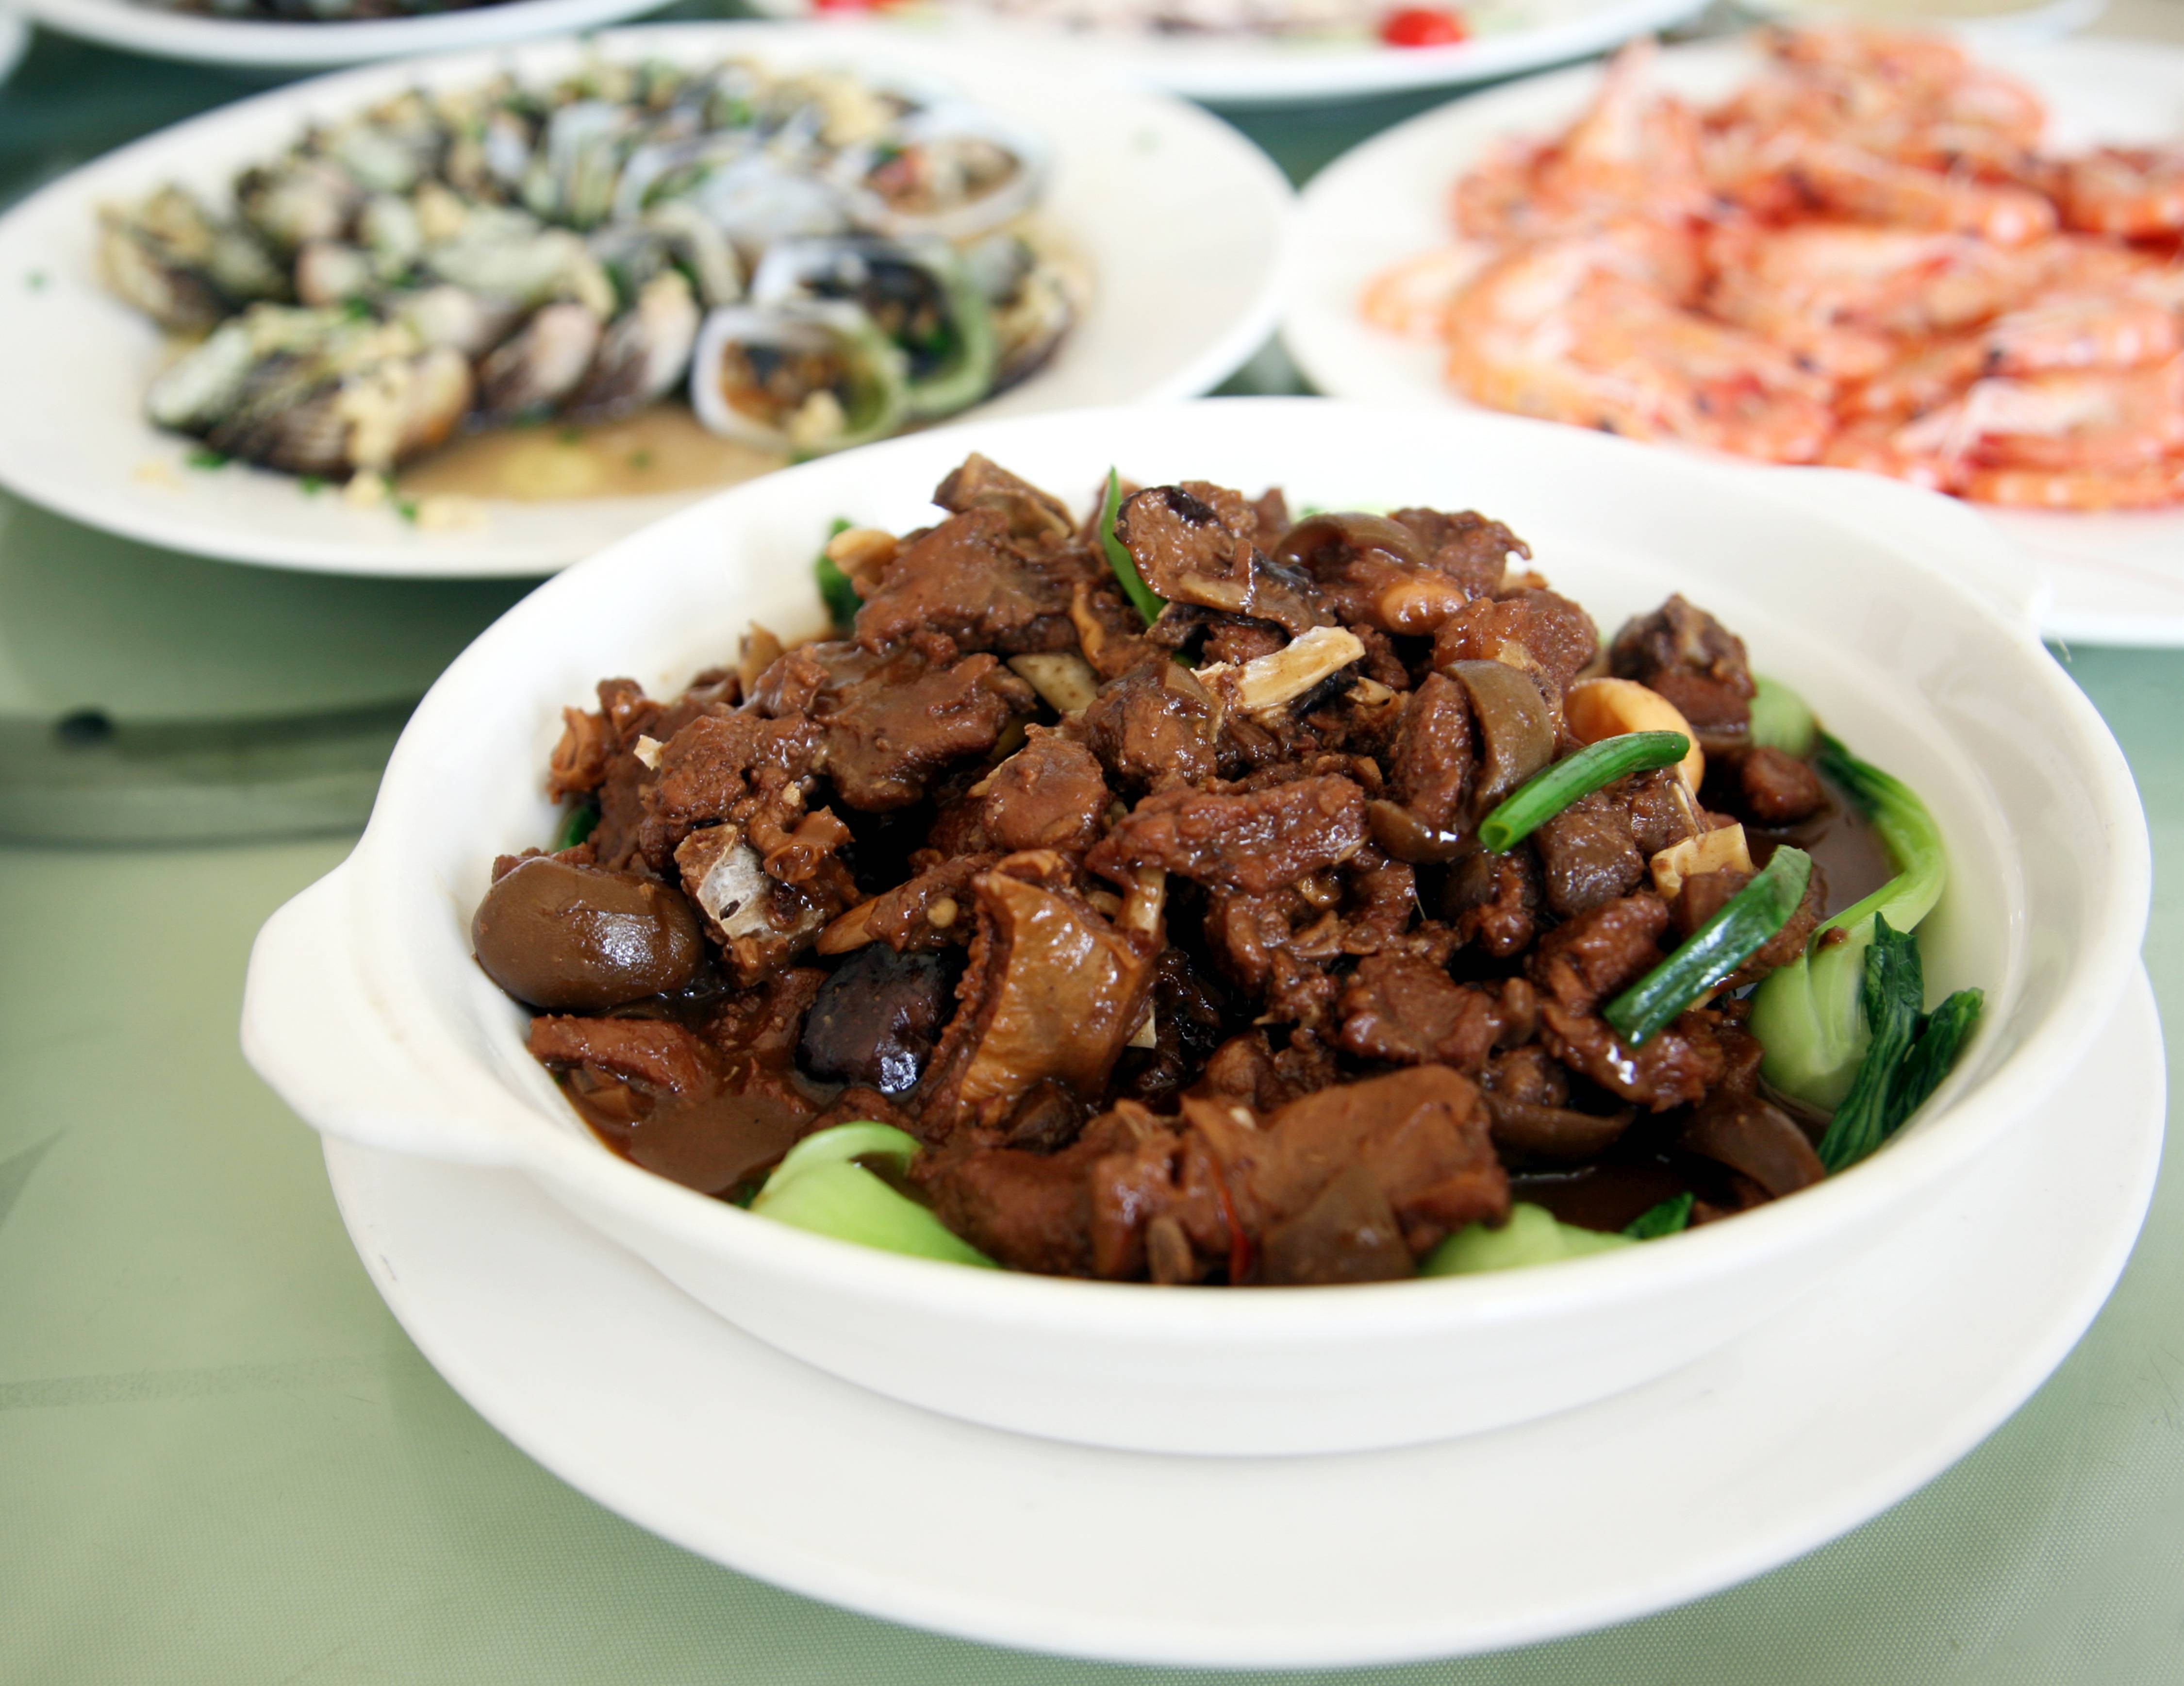 Dongshan lamb is a delicious delicacy made from the meat of free-range goats.